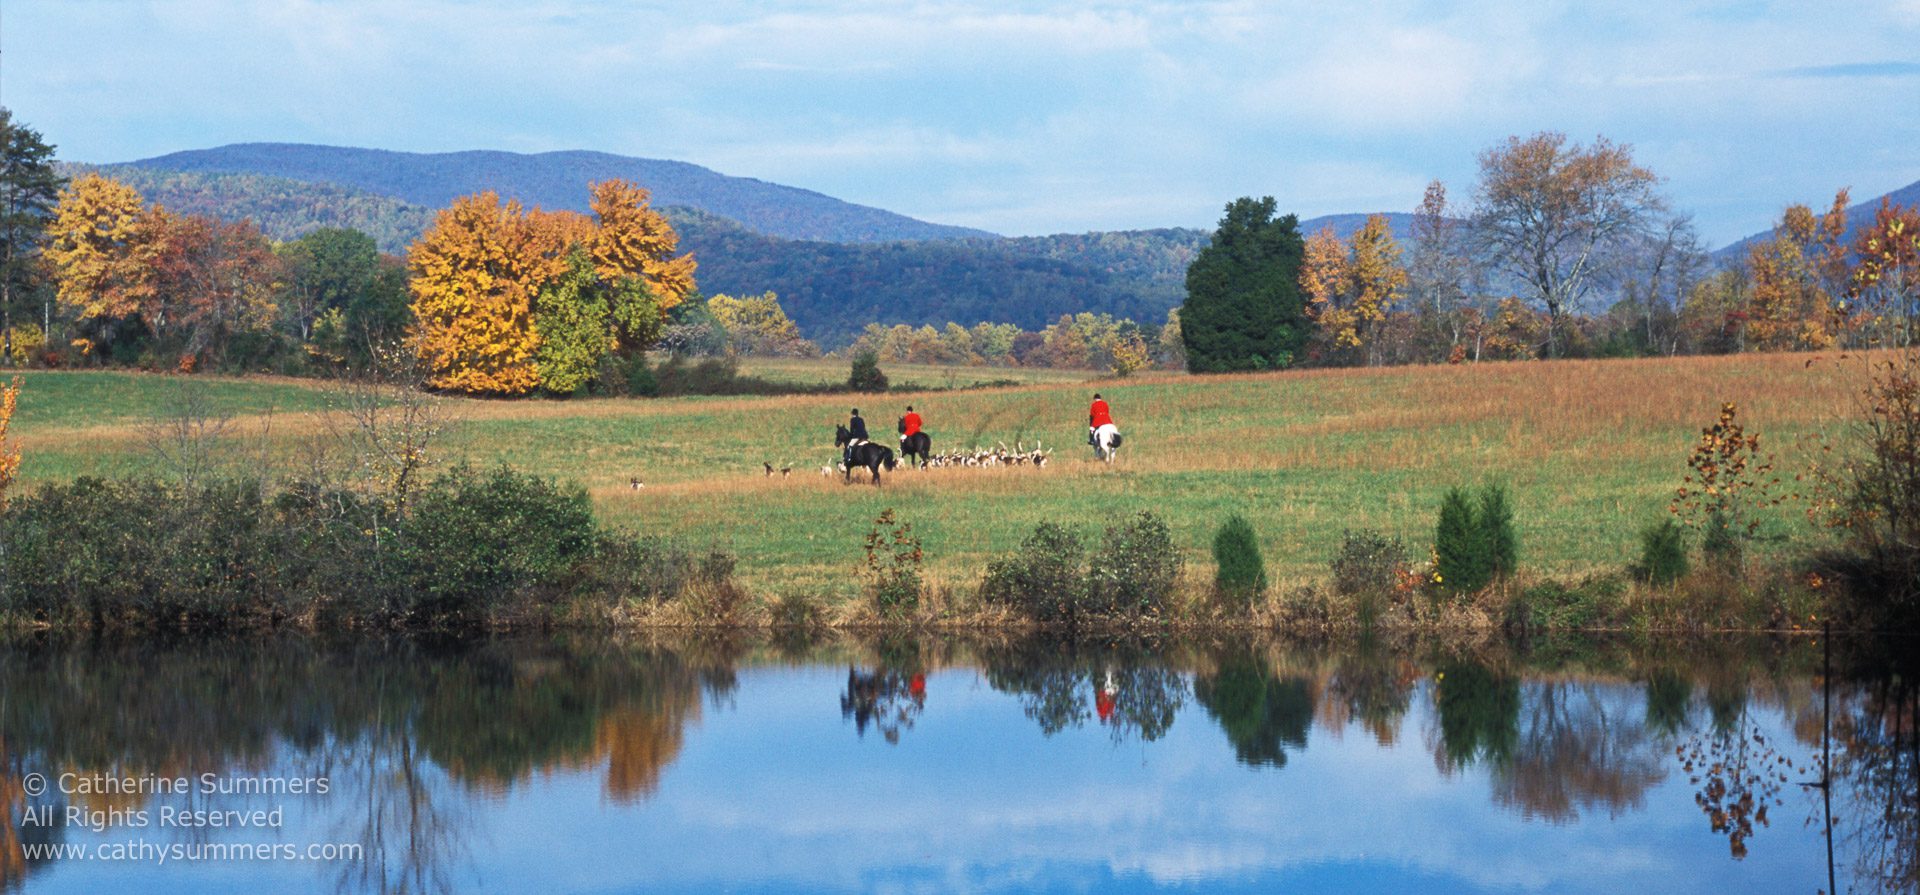 huntsman and staff across pond with reflection, fall trees and mountains in background